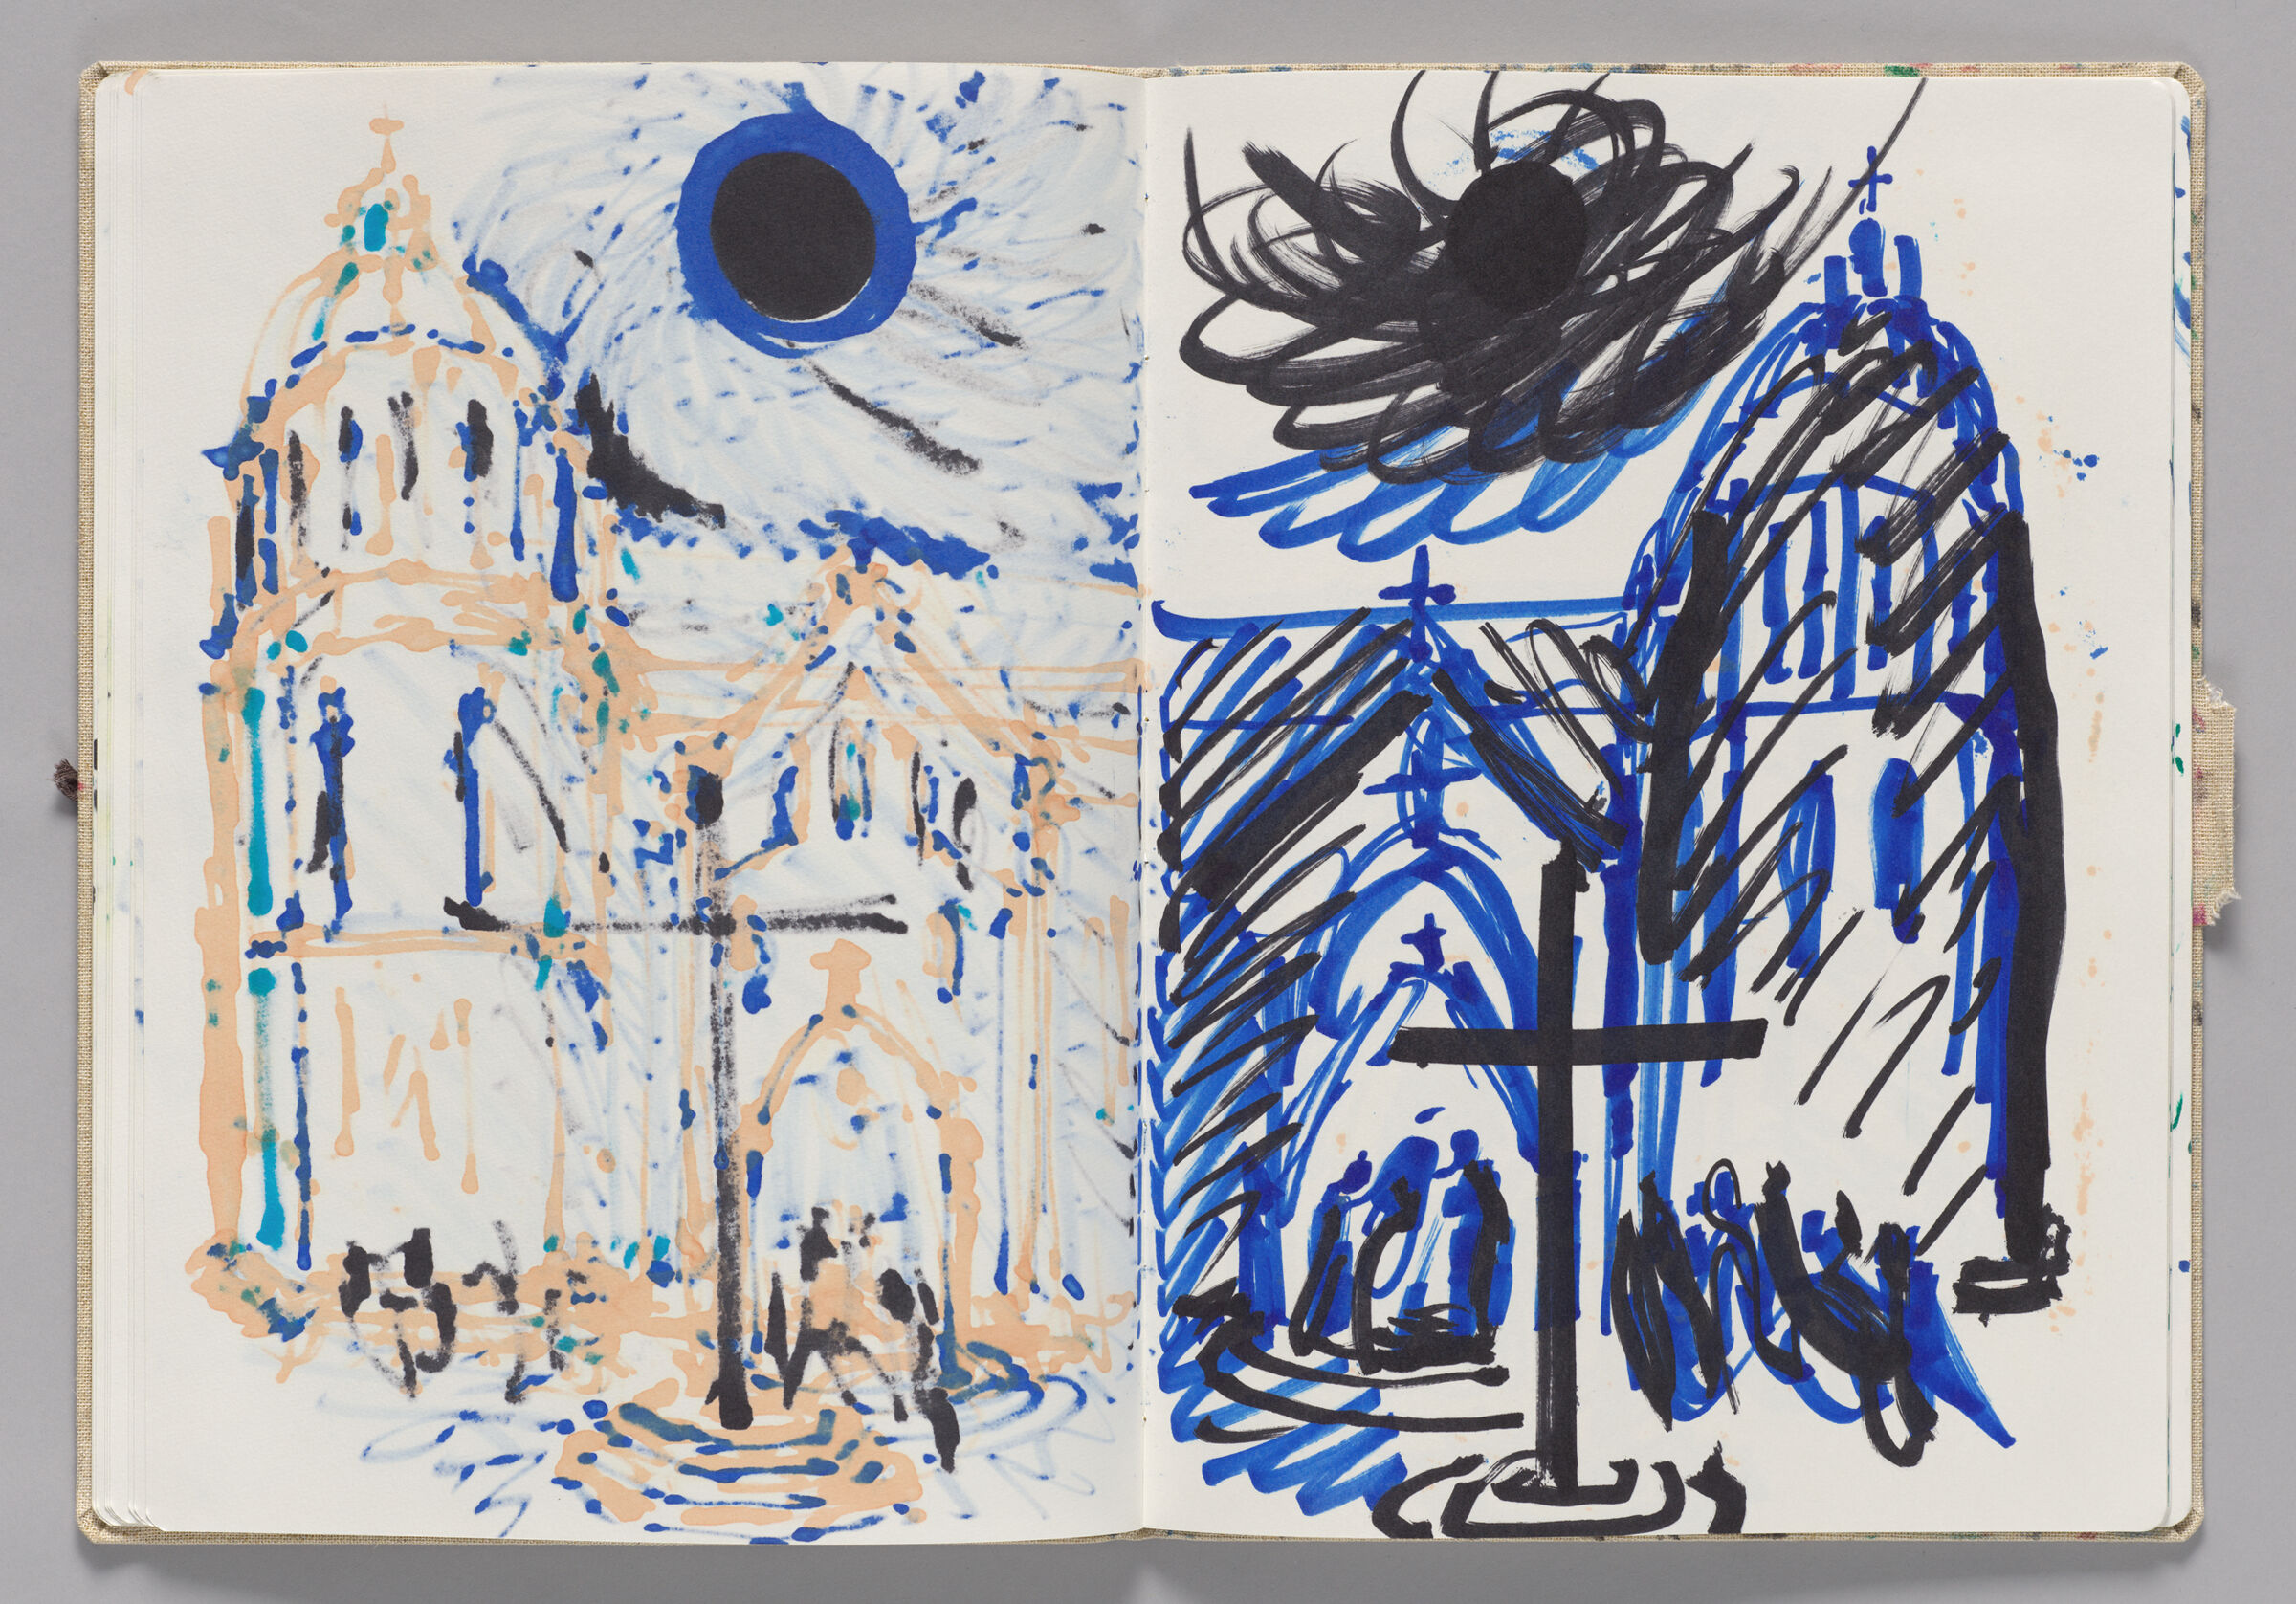 Untitled (Bleed-Through Of Previous Page, Left Page); Untitled (Church, Right Page)